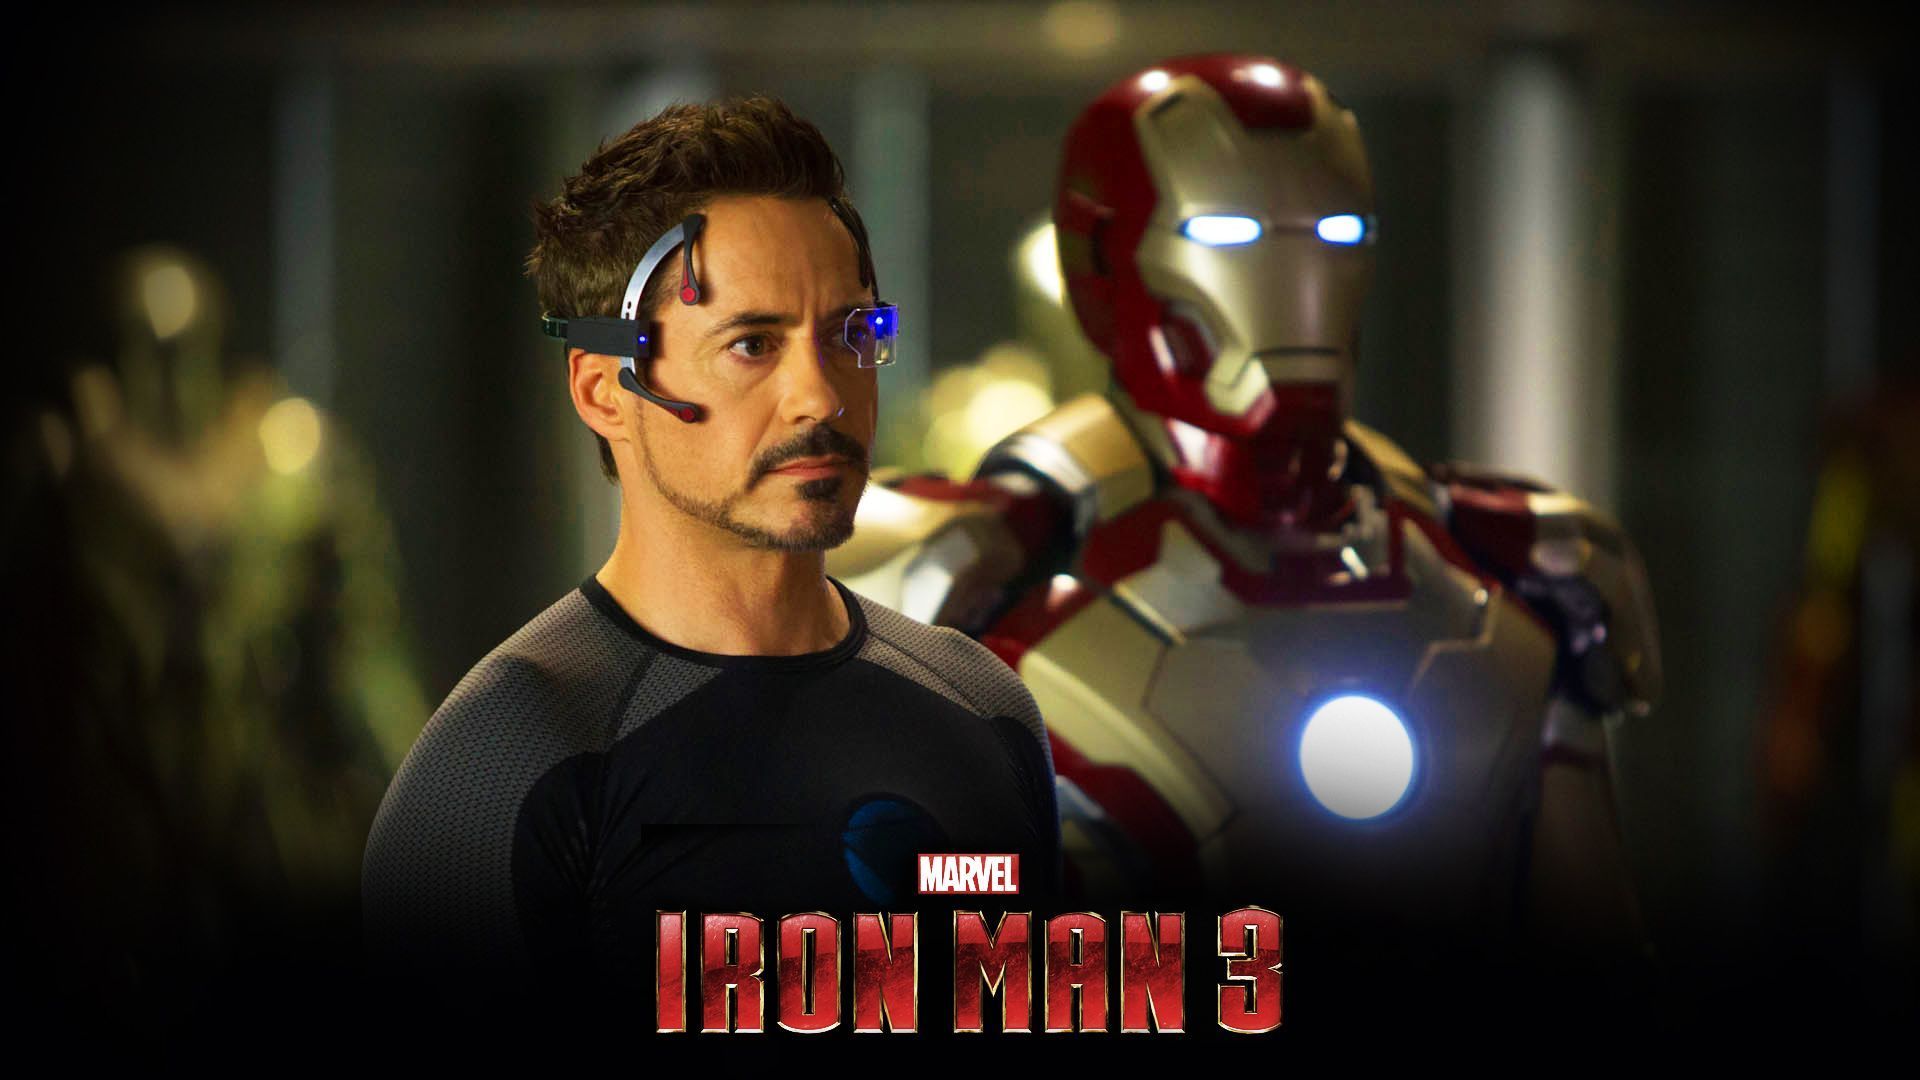 Iron Man 3 Windows 8.1 Theme and Wallpaper | All for Windows 10 Free